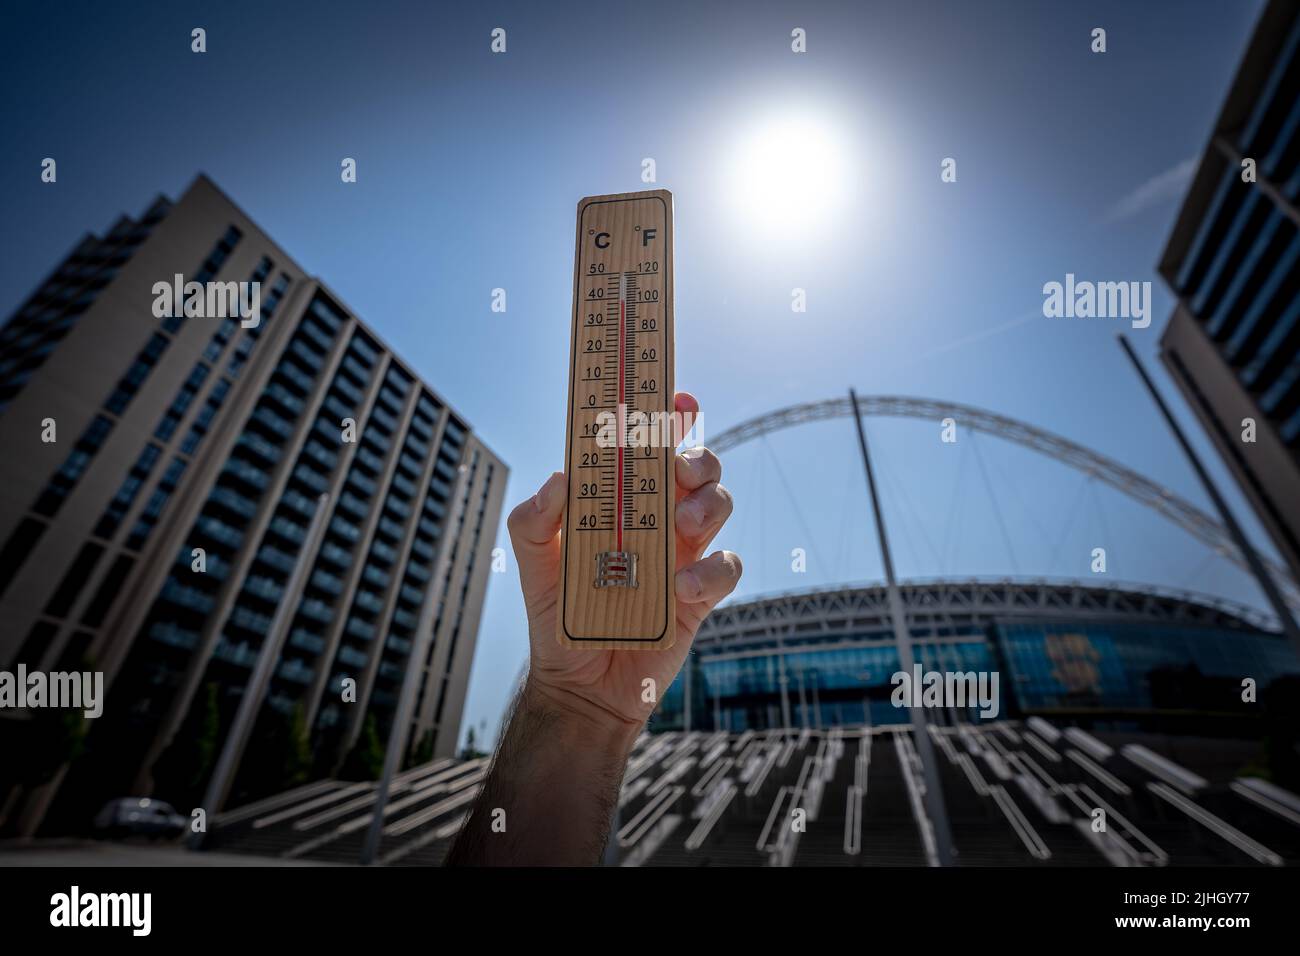 London, UK. 18th July, 2022. UK Weather: Heatwave Monday.  Afternoon temperatures push nearly 40C near Wembley Stadium. Temperatures continue to rise with an amber alert in place for extreme heat. Britain could soon experience its hottest day as Met Office predicts Britain could hit 41C high. Credit: Guy Corbishley/Alamy Live News Stock Photo